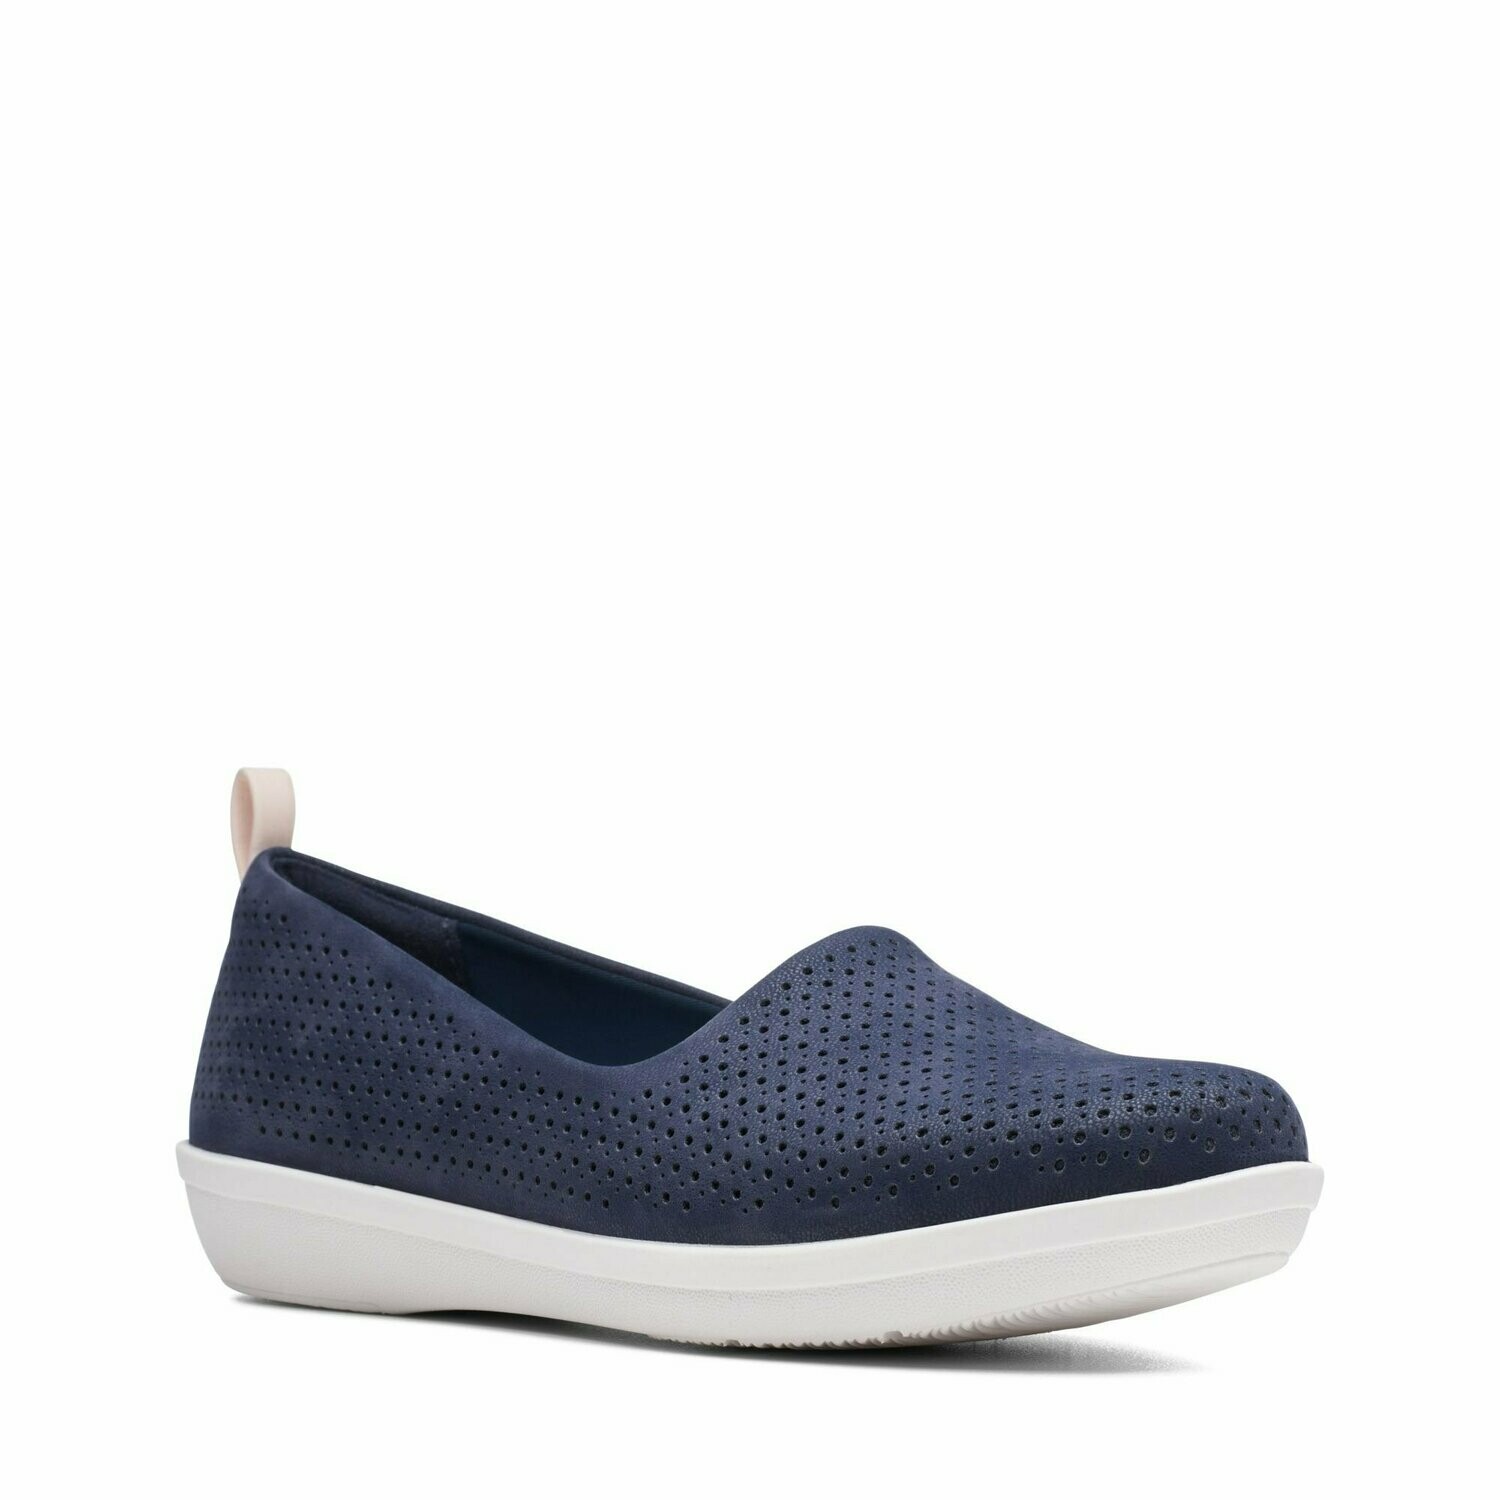 Clarks Ayla Blair Perforated Slip On